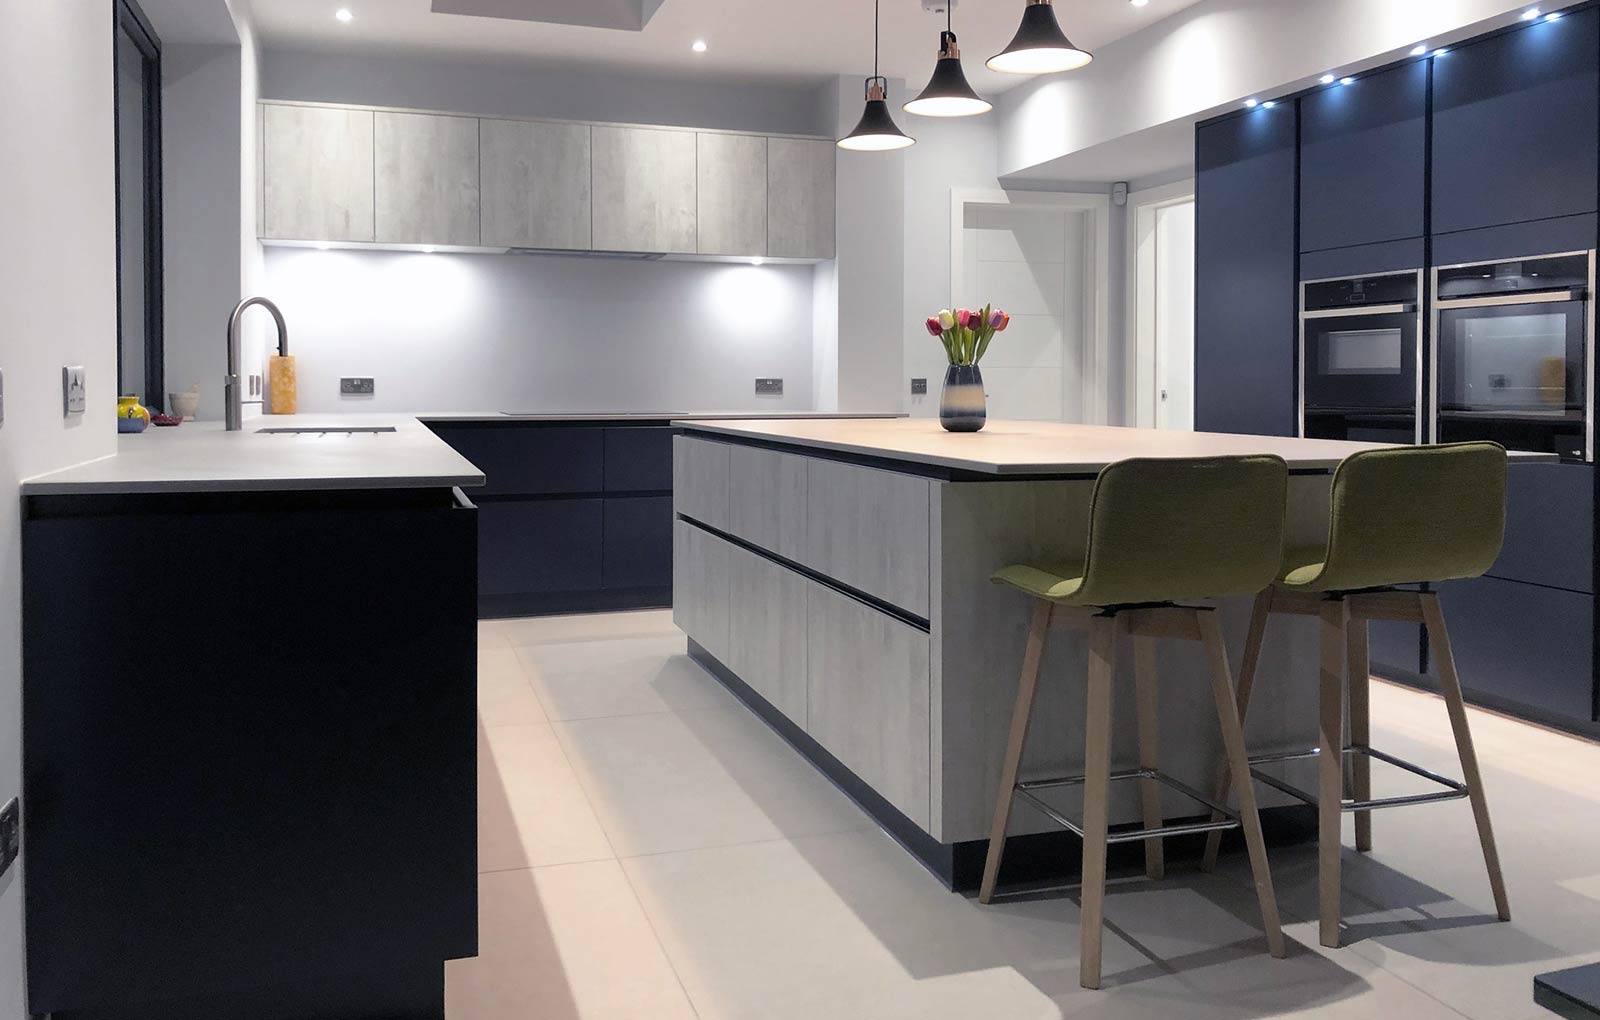 4 Ideas For The Perfect Handleless Kitchen Design - Find Your Kitchen